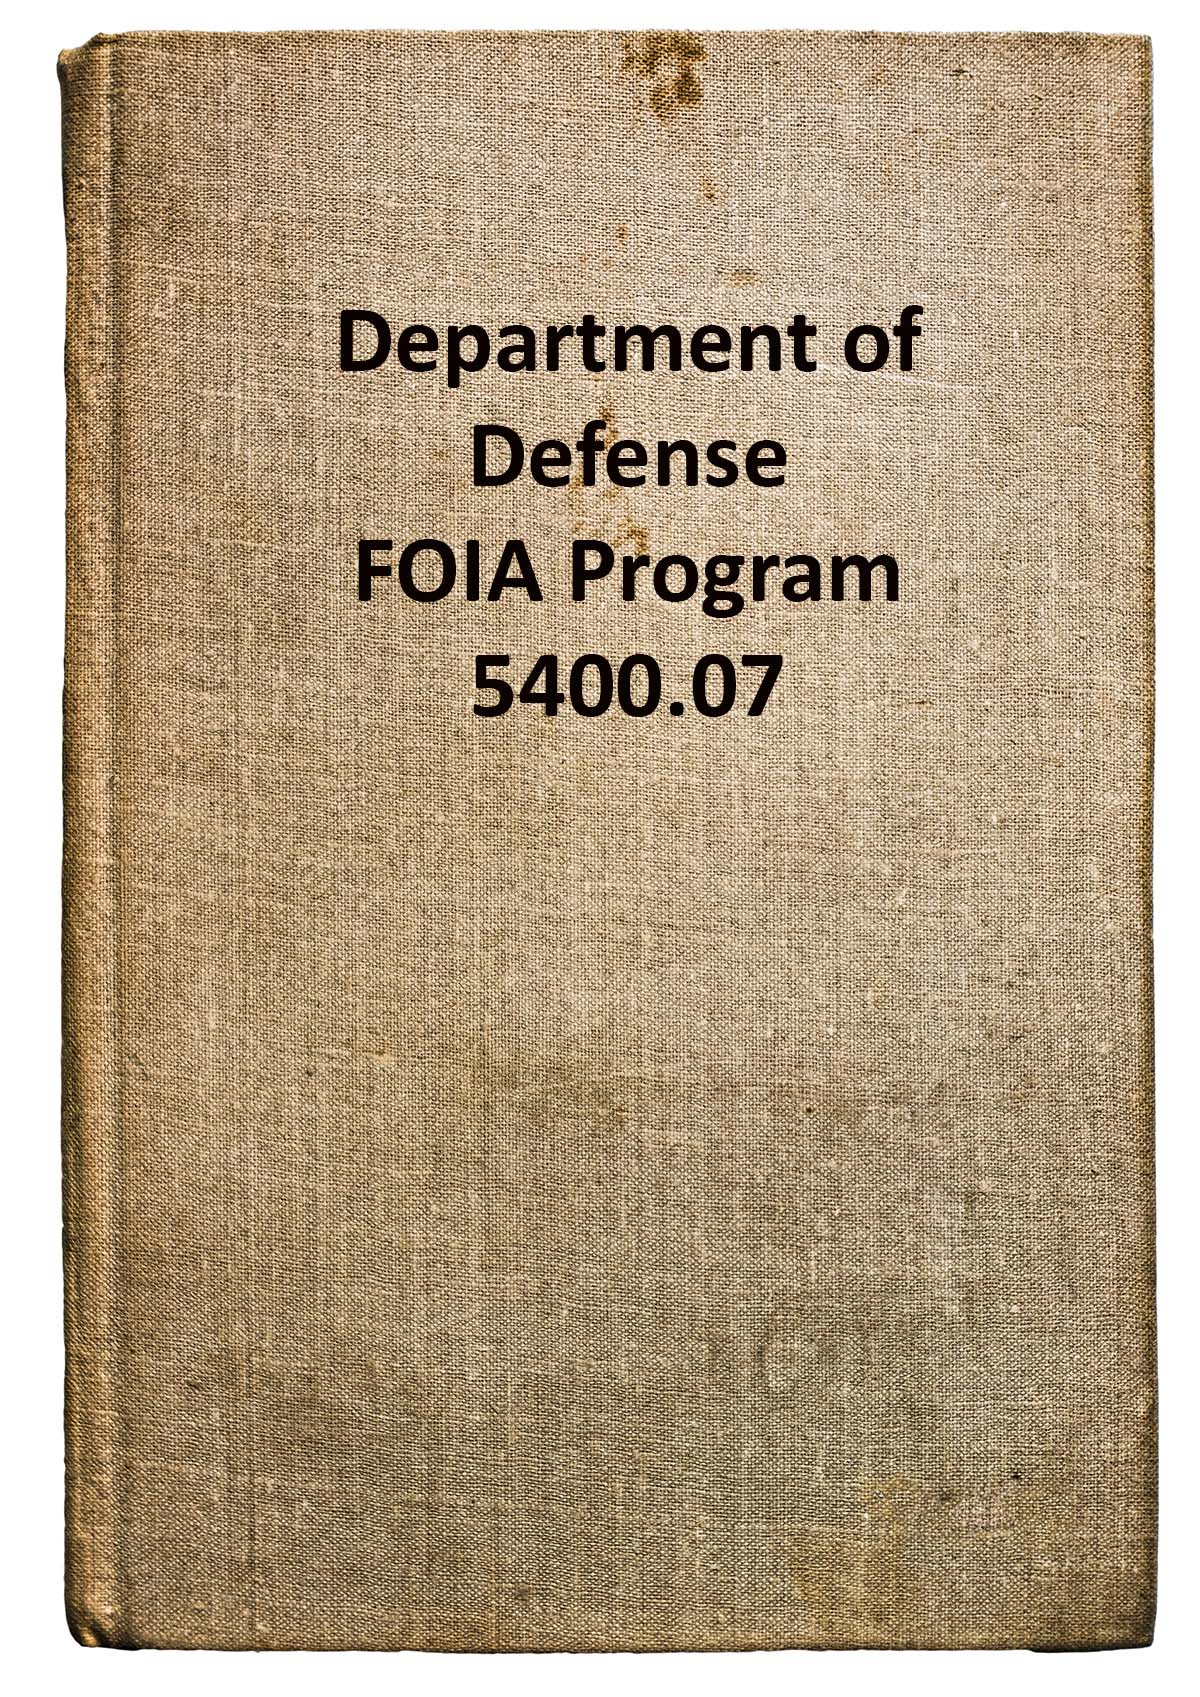 This is a graphic and link to the Department of Defense Freedom of Information Program Instruction